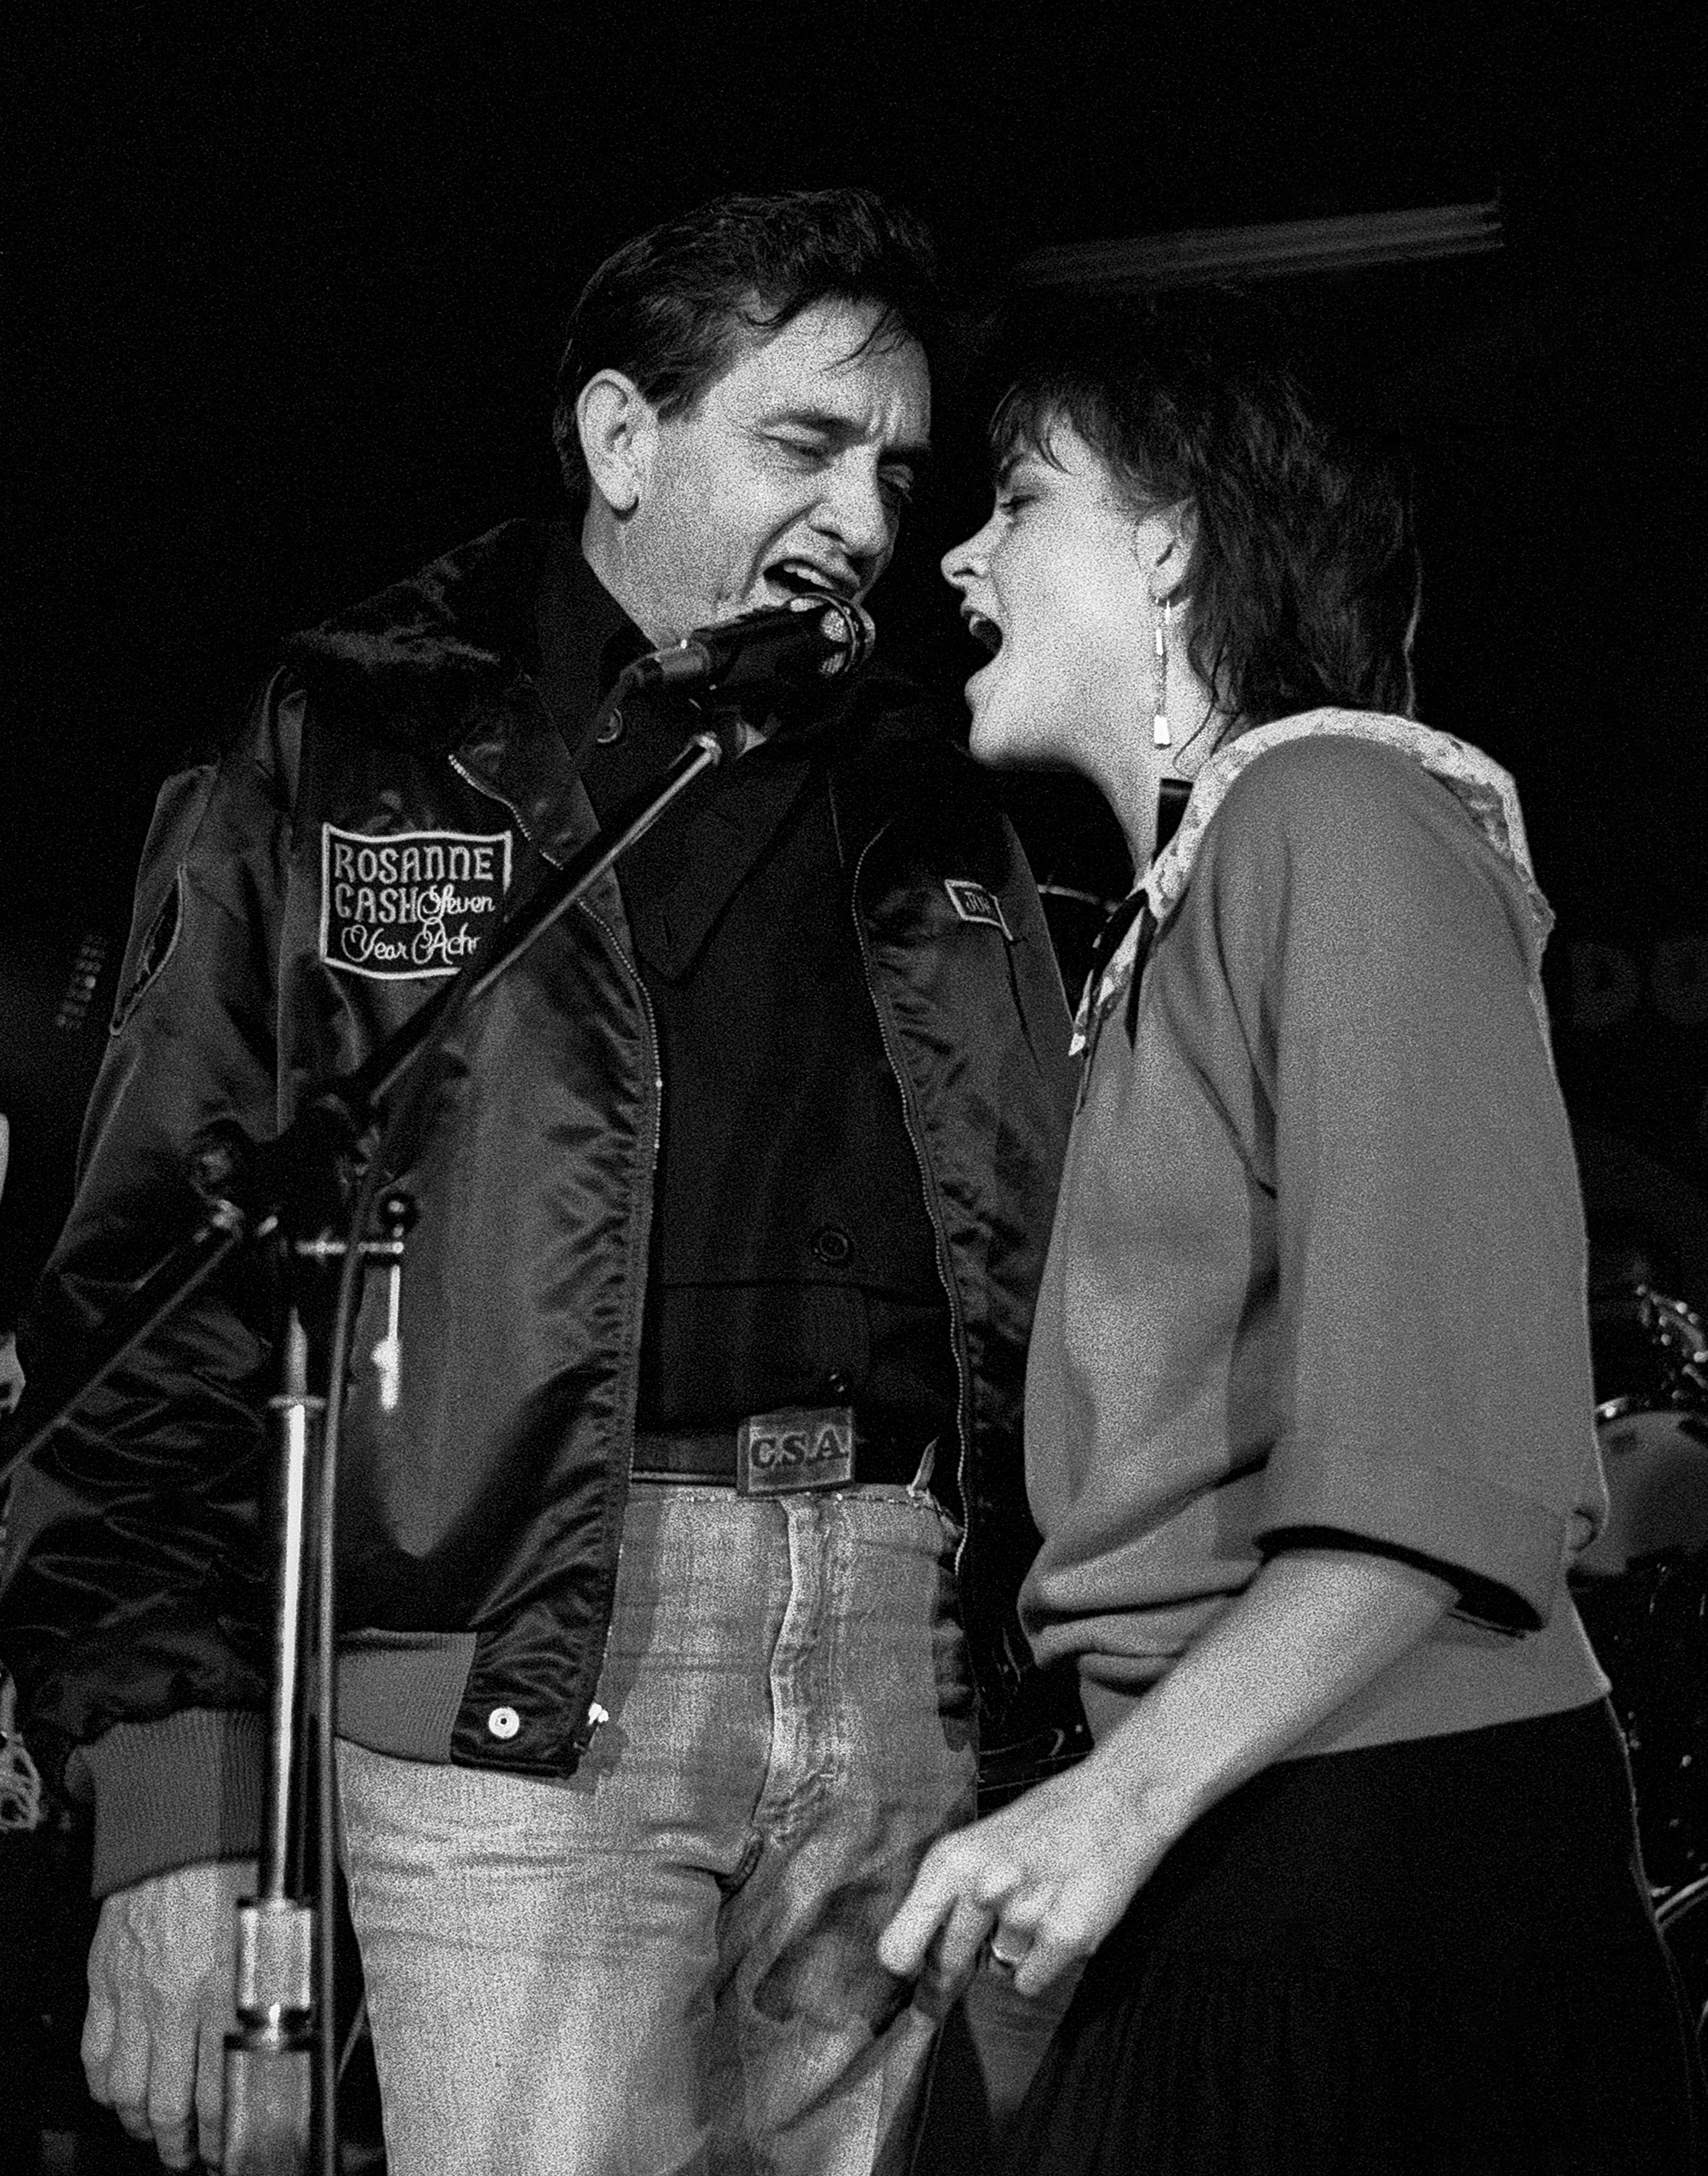 Rosanne Cash and Johnny Cash preforming together at The MoonShadow Saloon in Atlanta, on October 19, 1982 | Source: Getty Images